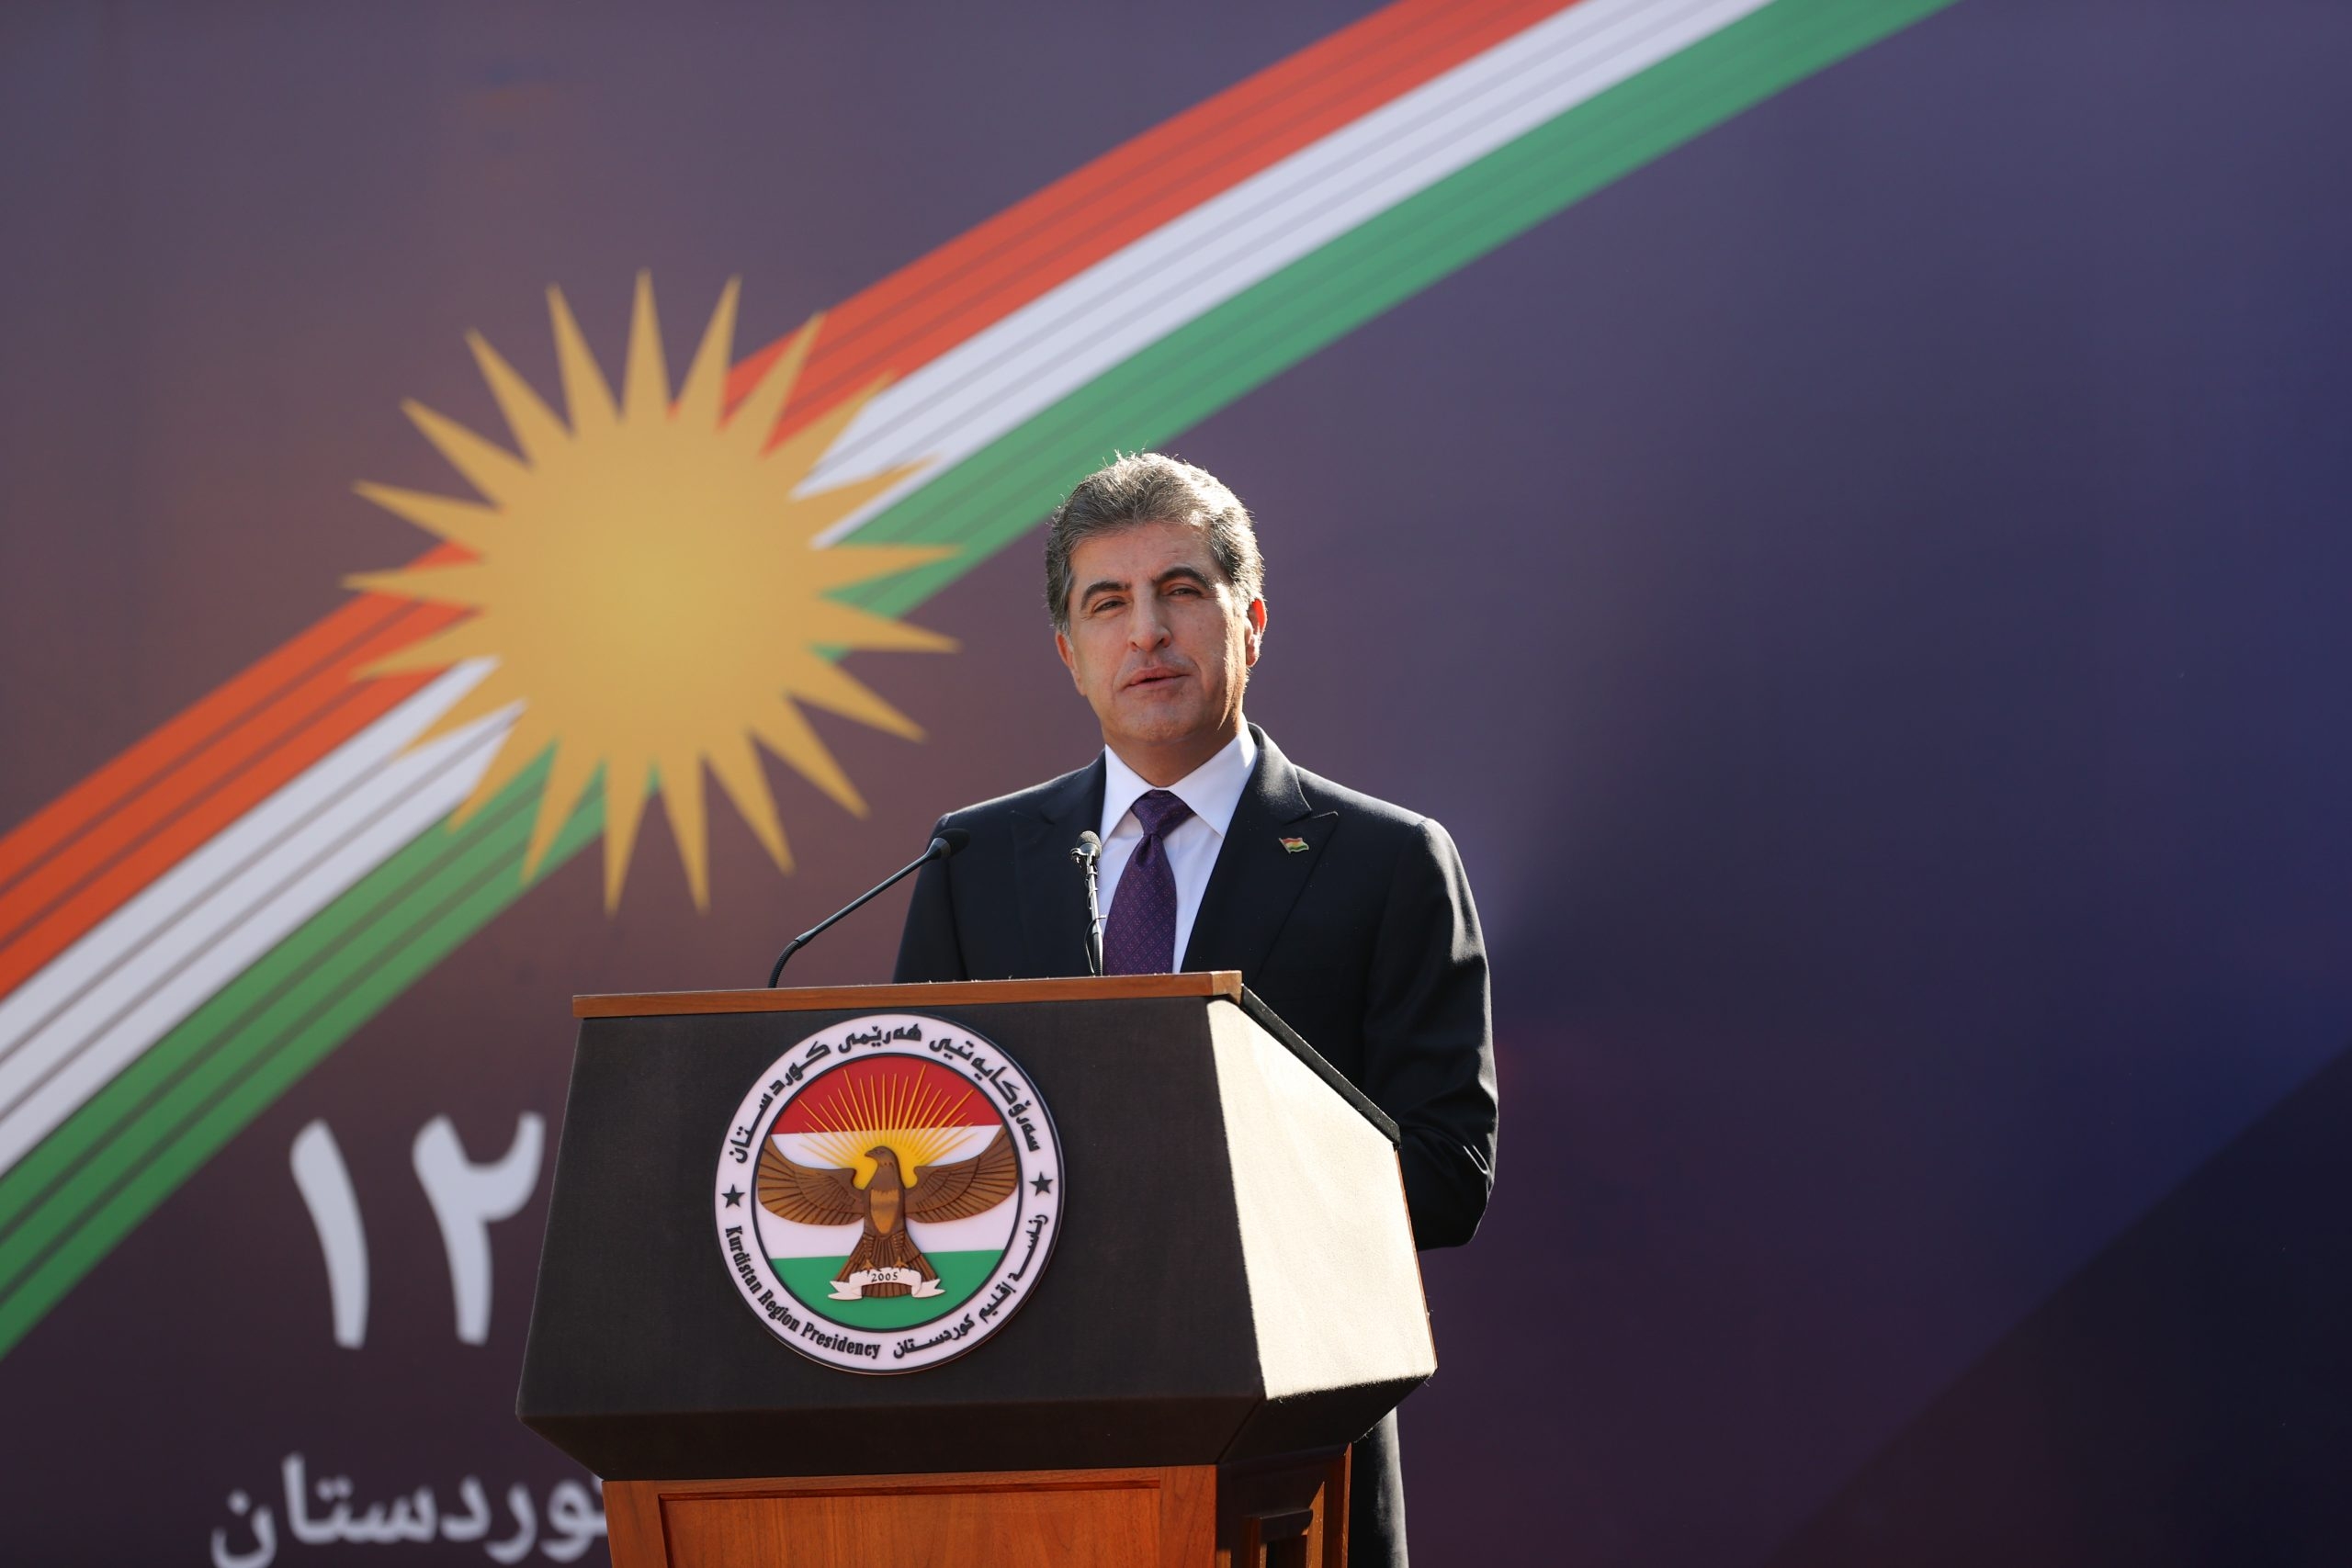 President Nechirvan Barzani: The Kurdistan flag is the symbol of our shared aspirations